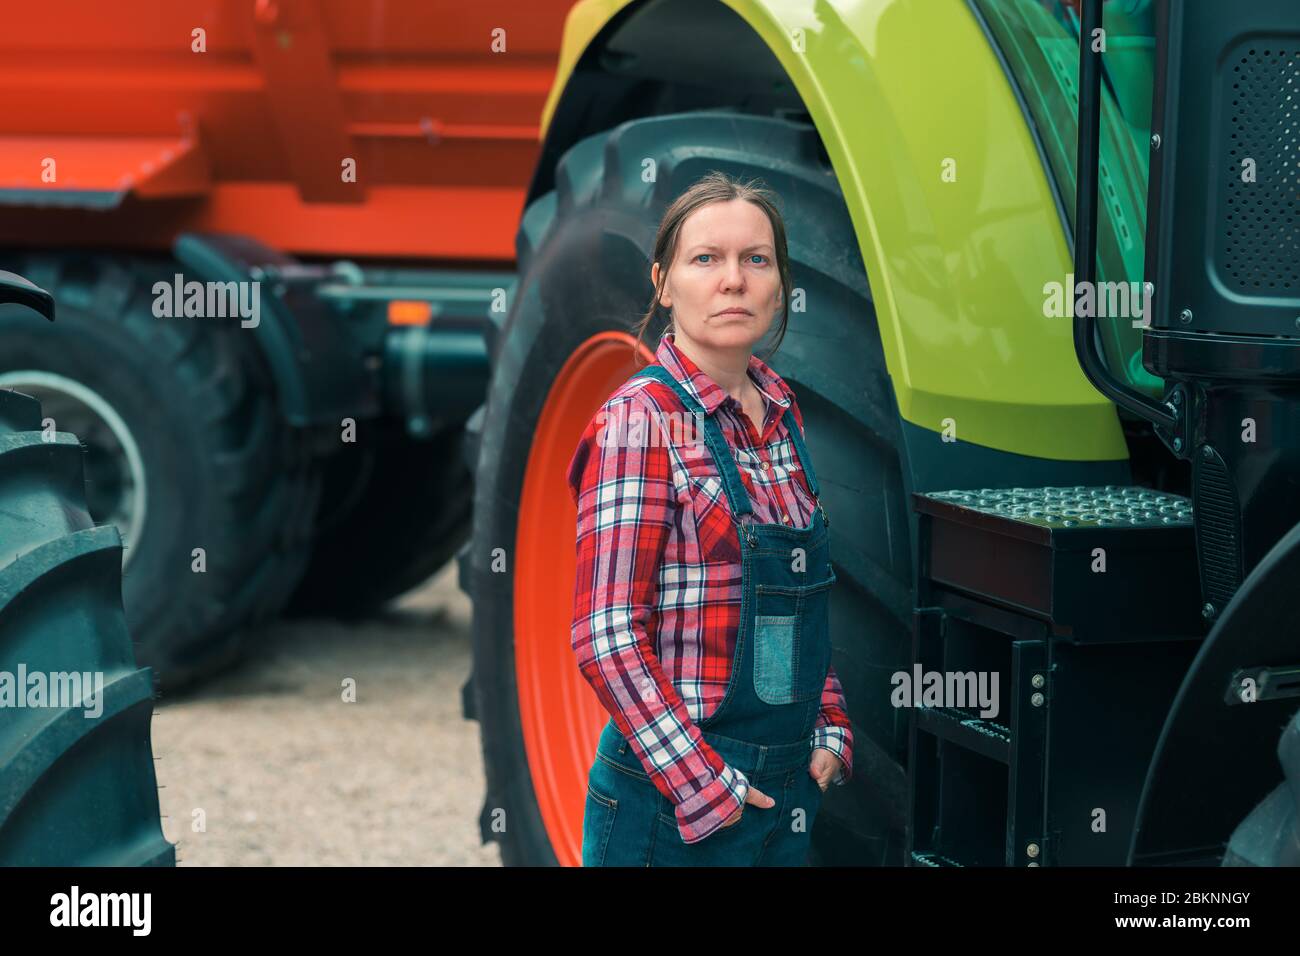 Female farmer and tractor. Woman doing men's job concept. Female farm worker posing in front of agricultural machinery. Stock Photo